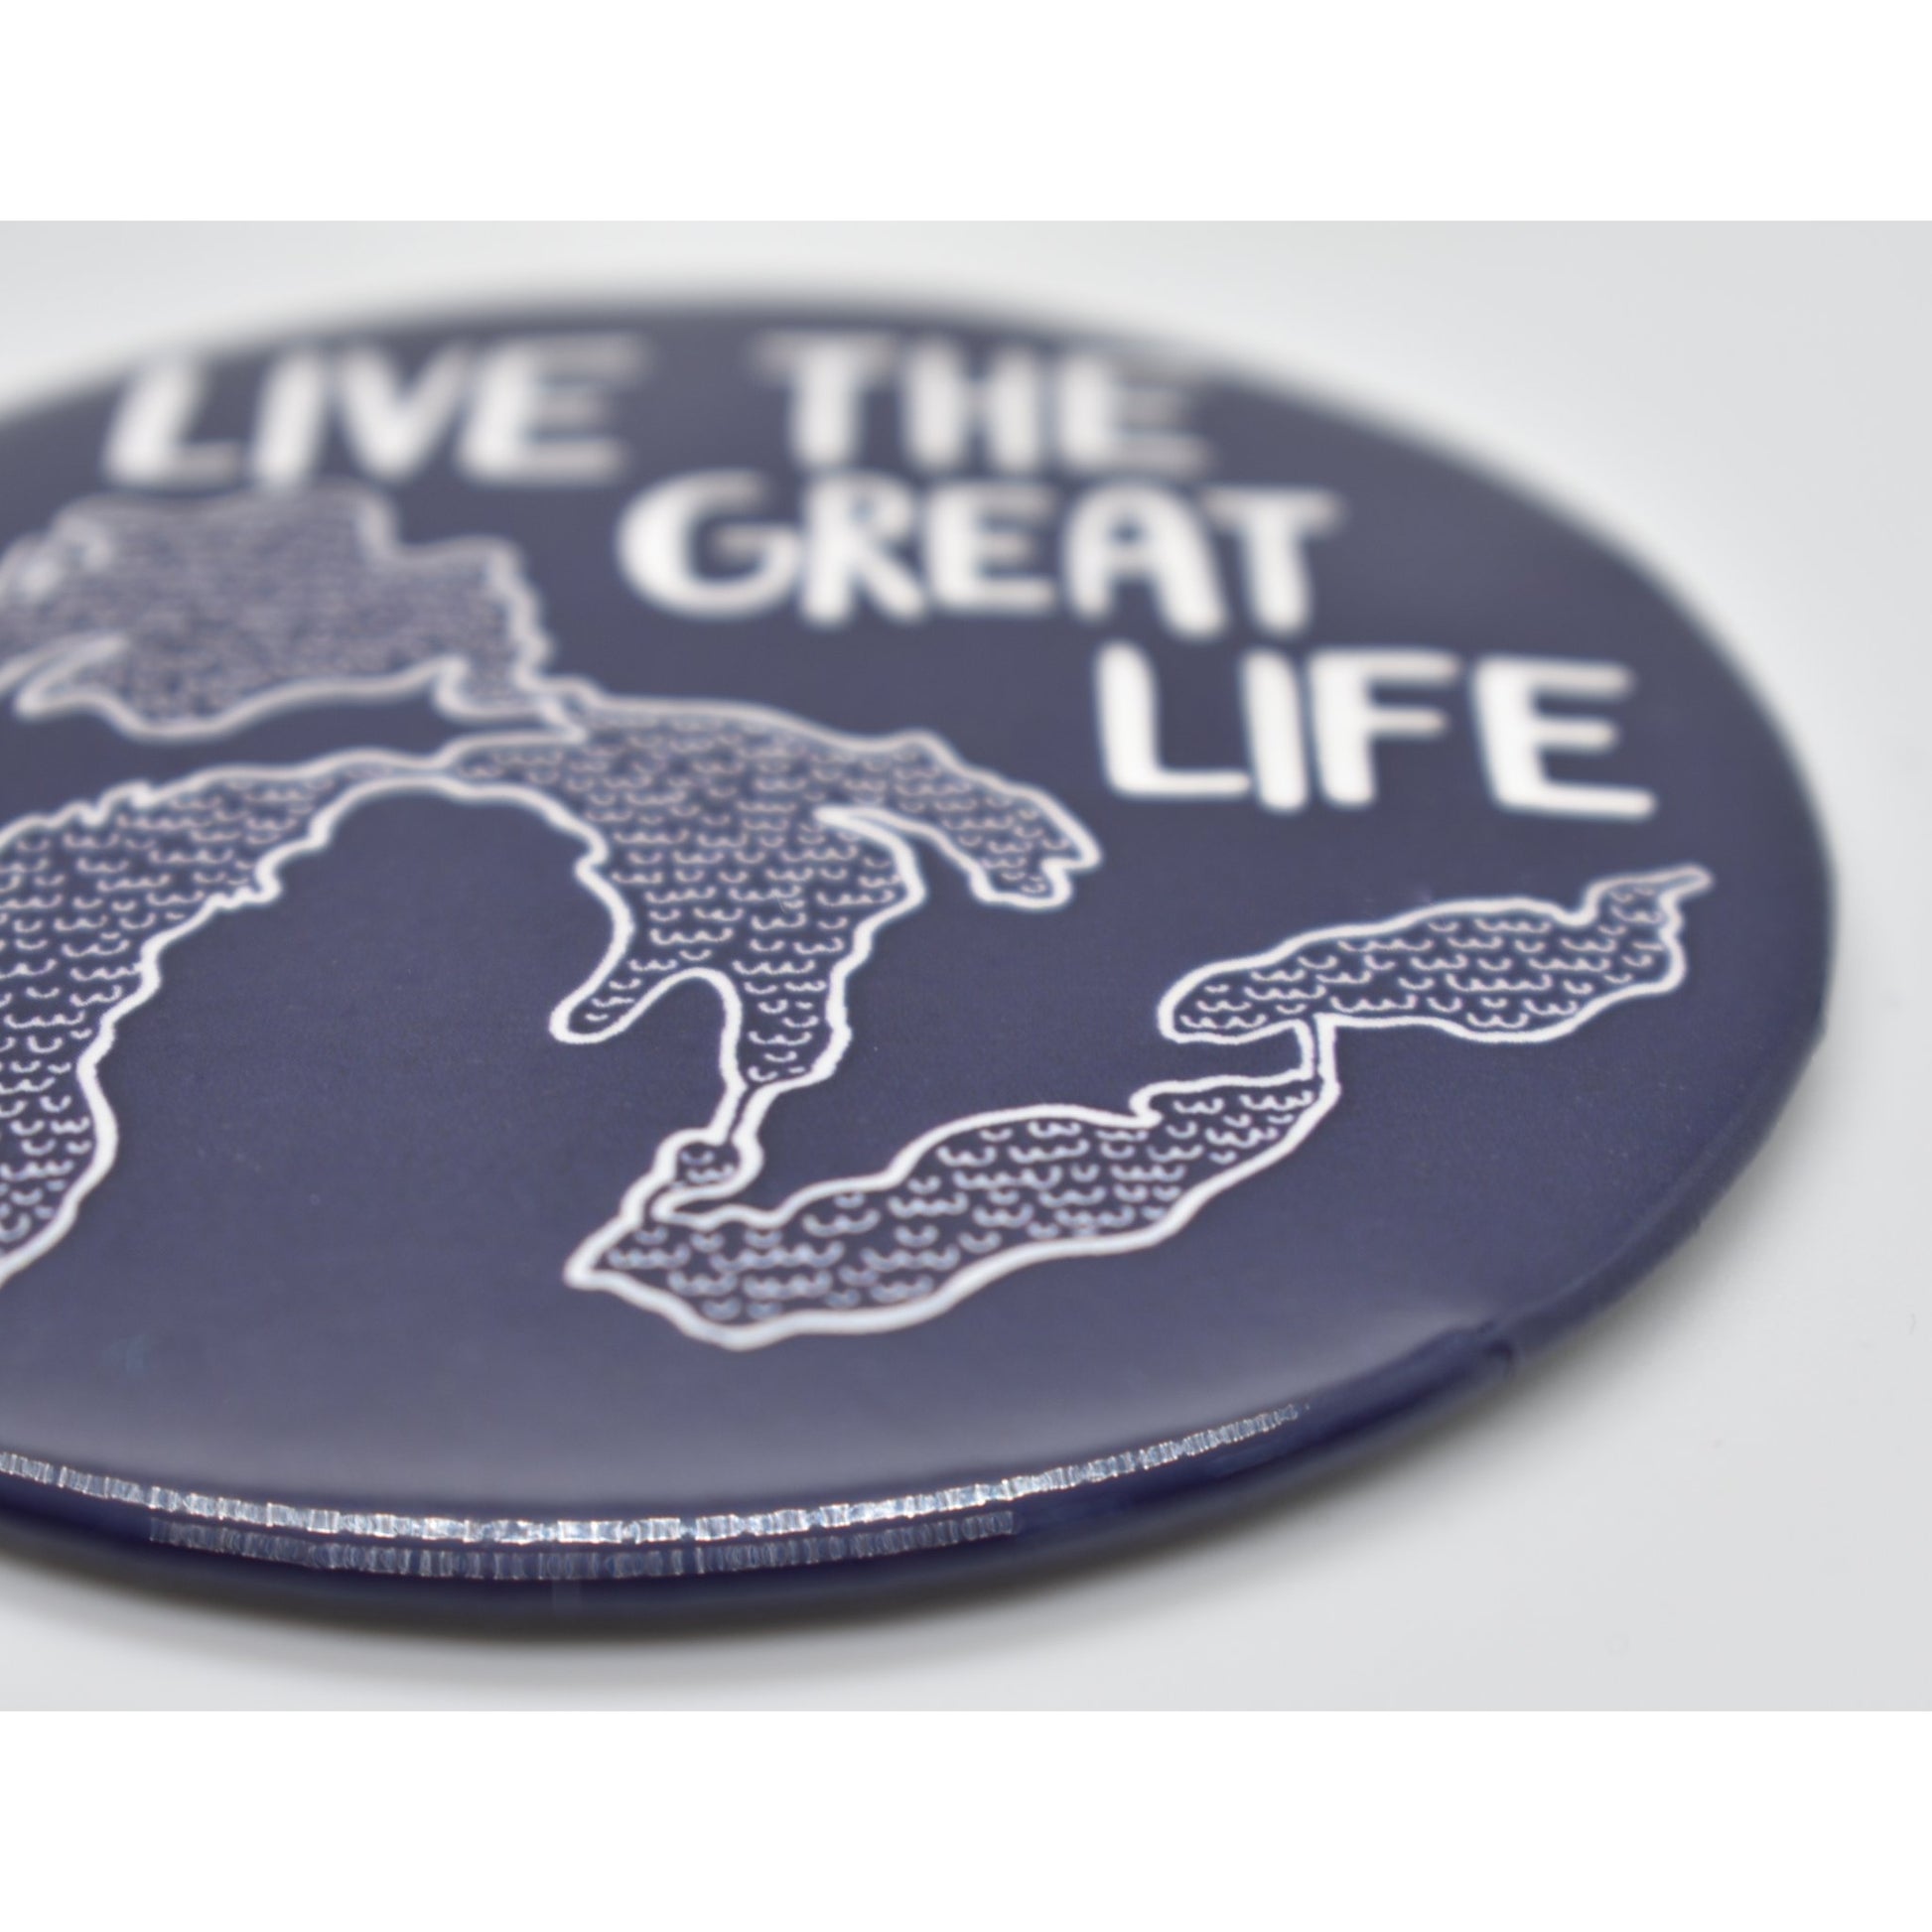 Live the Great Life Magnet - Storm and Sky Shoppe